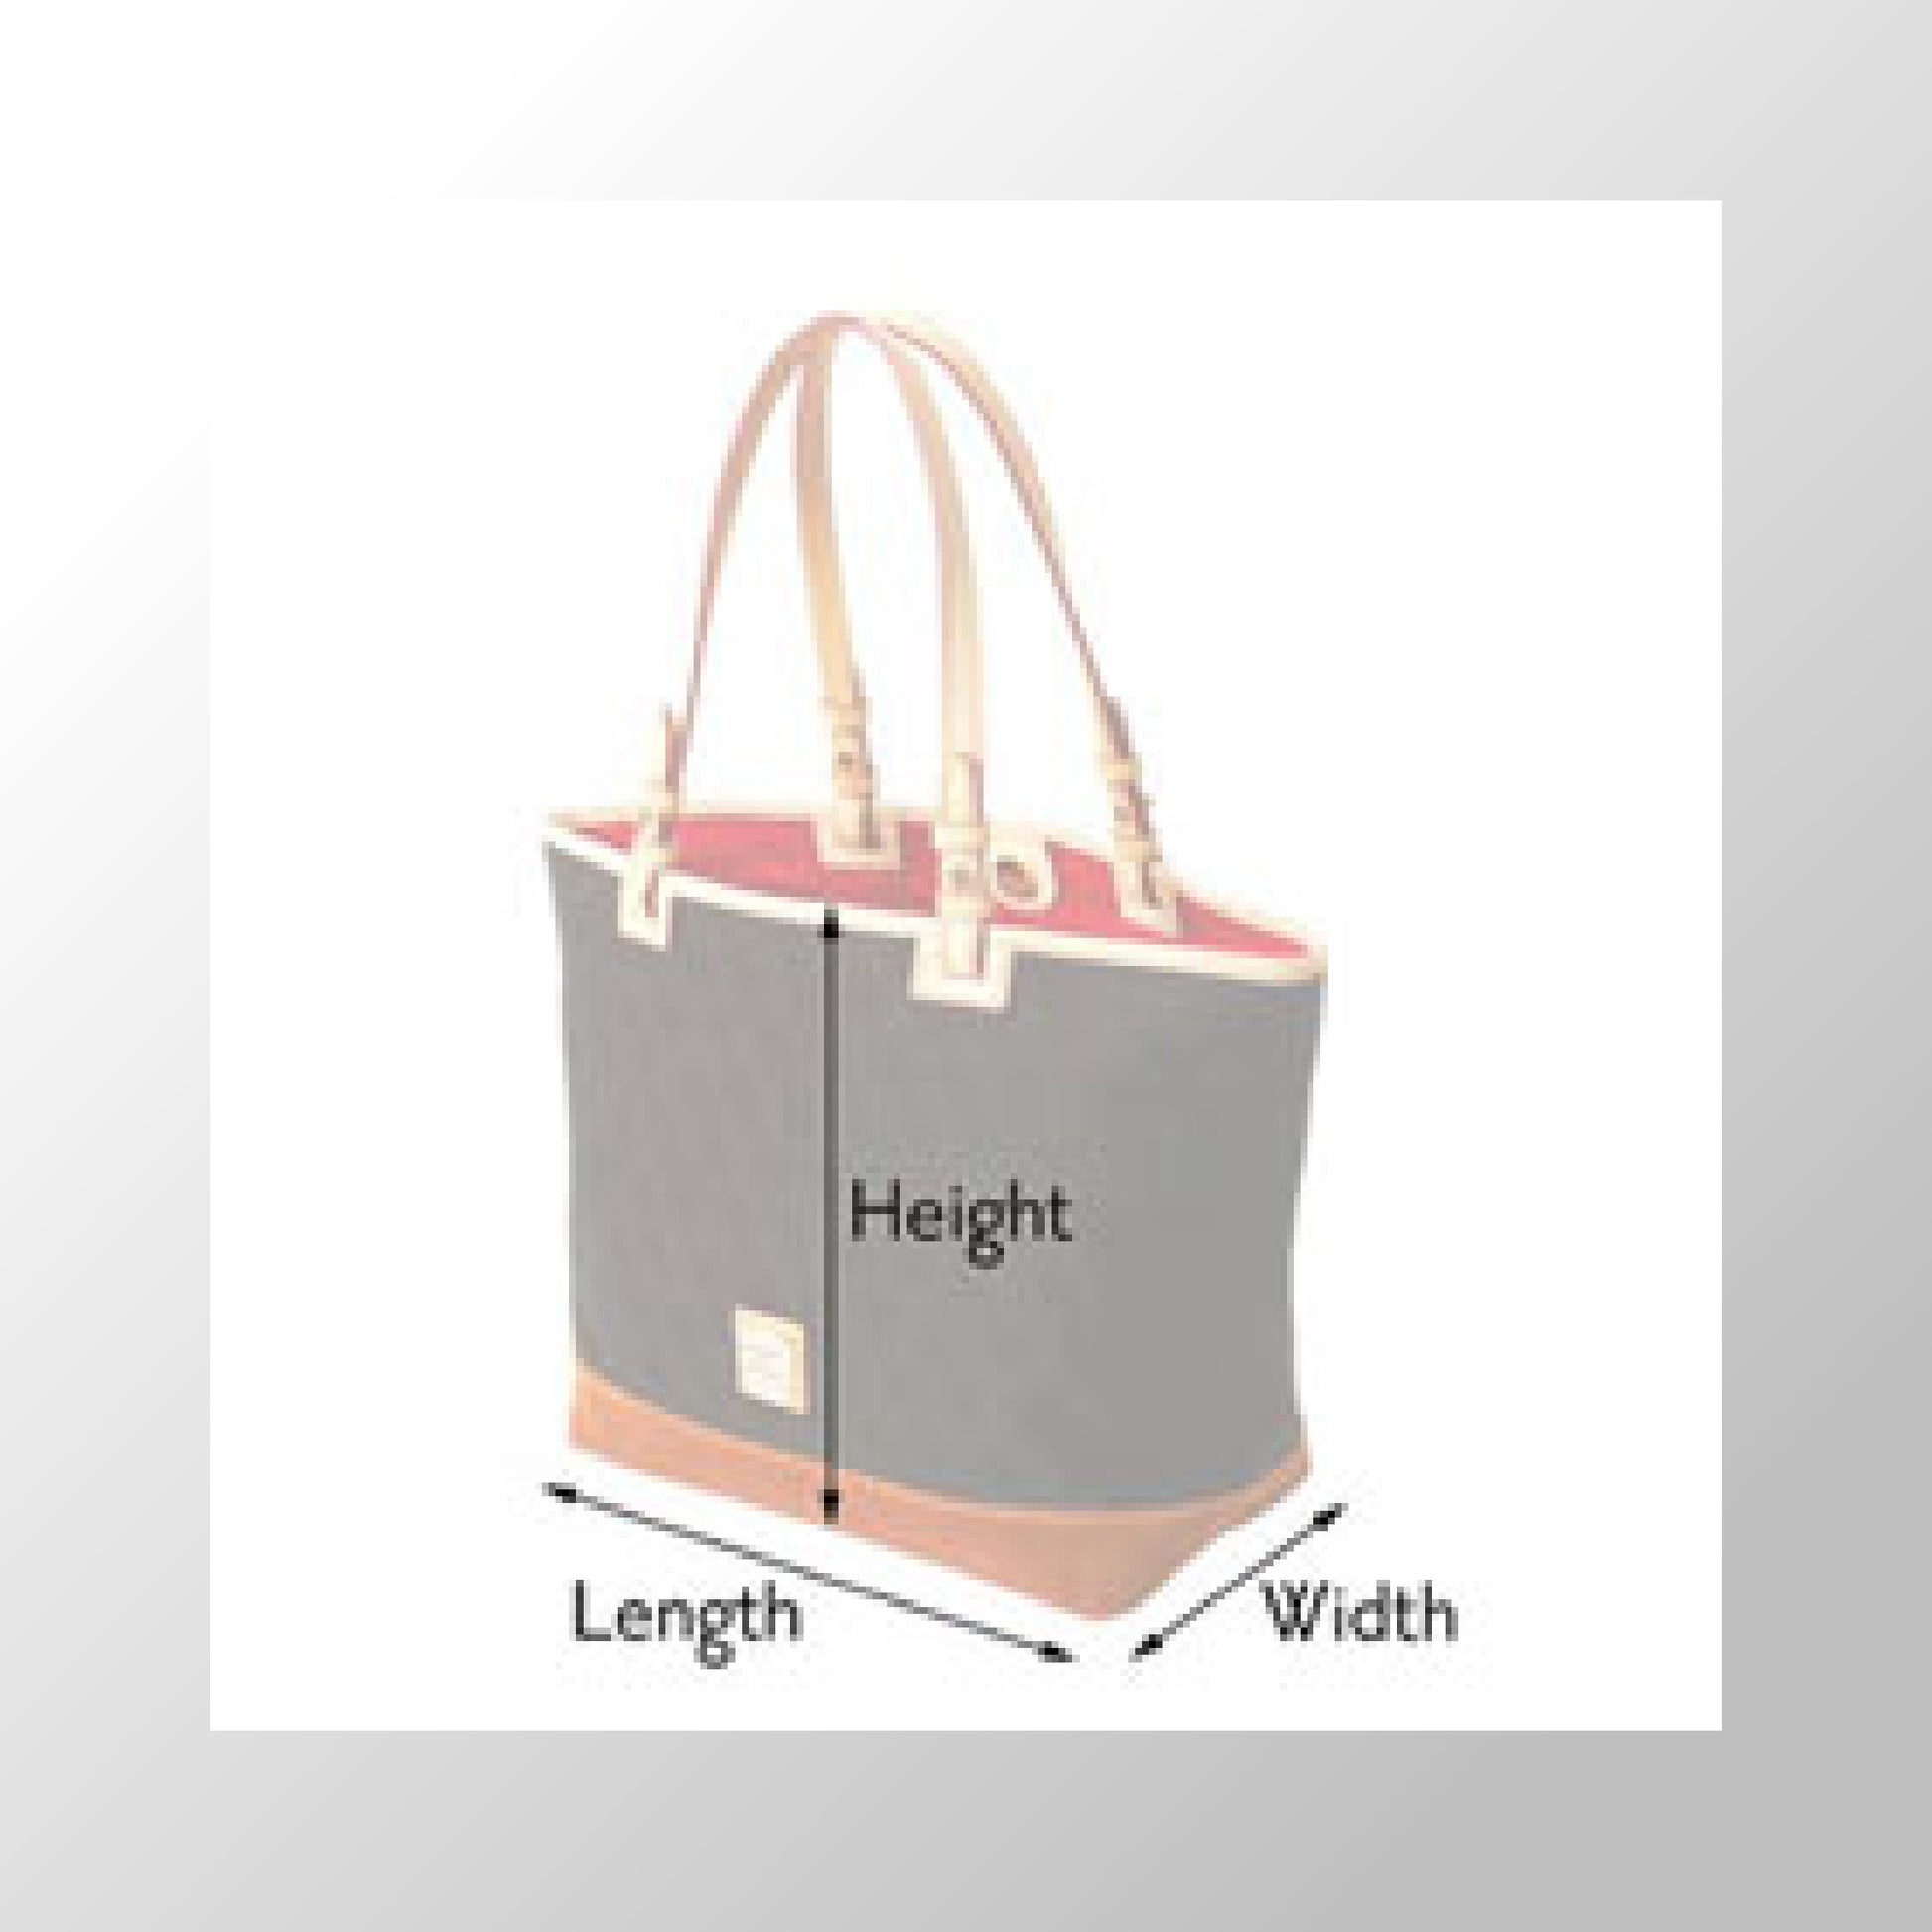 Diagram of how to measure a tote bag